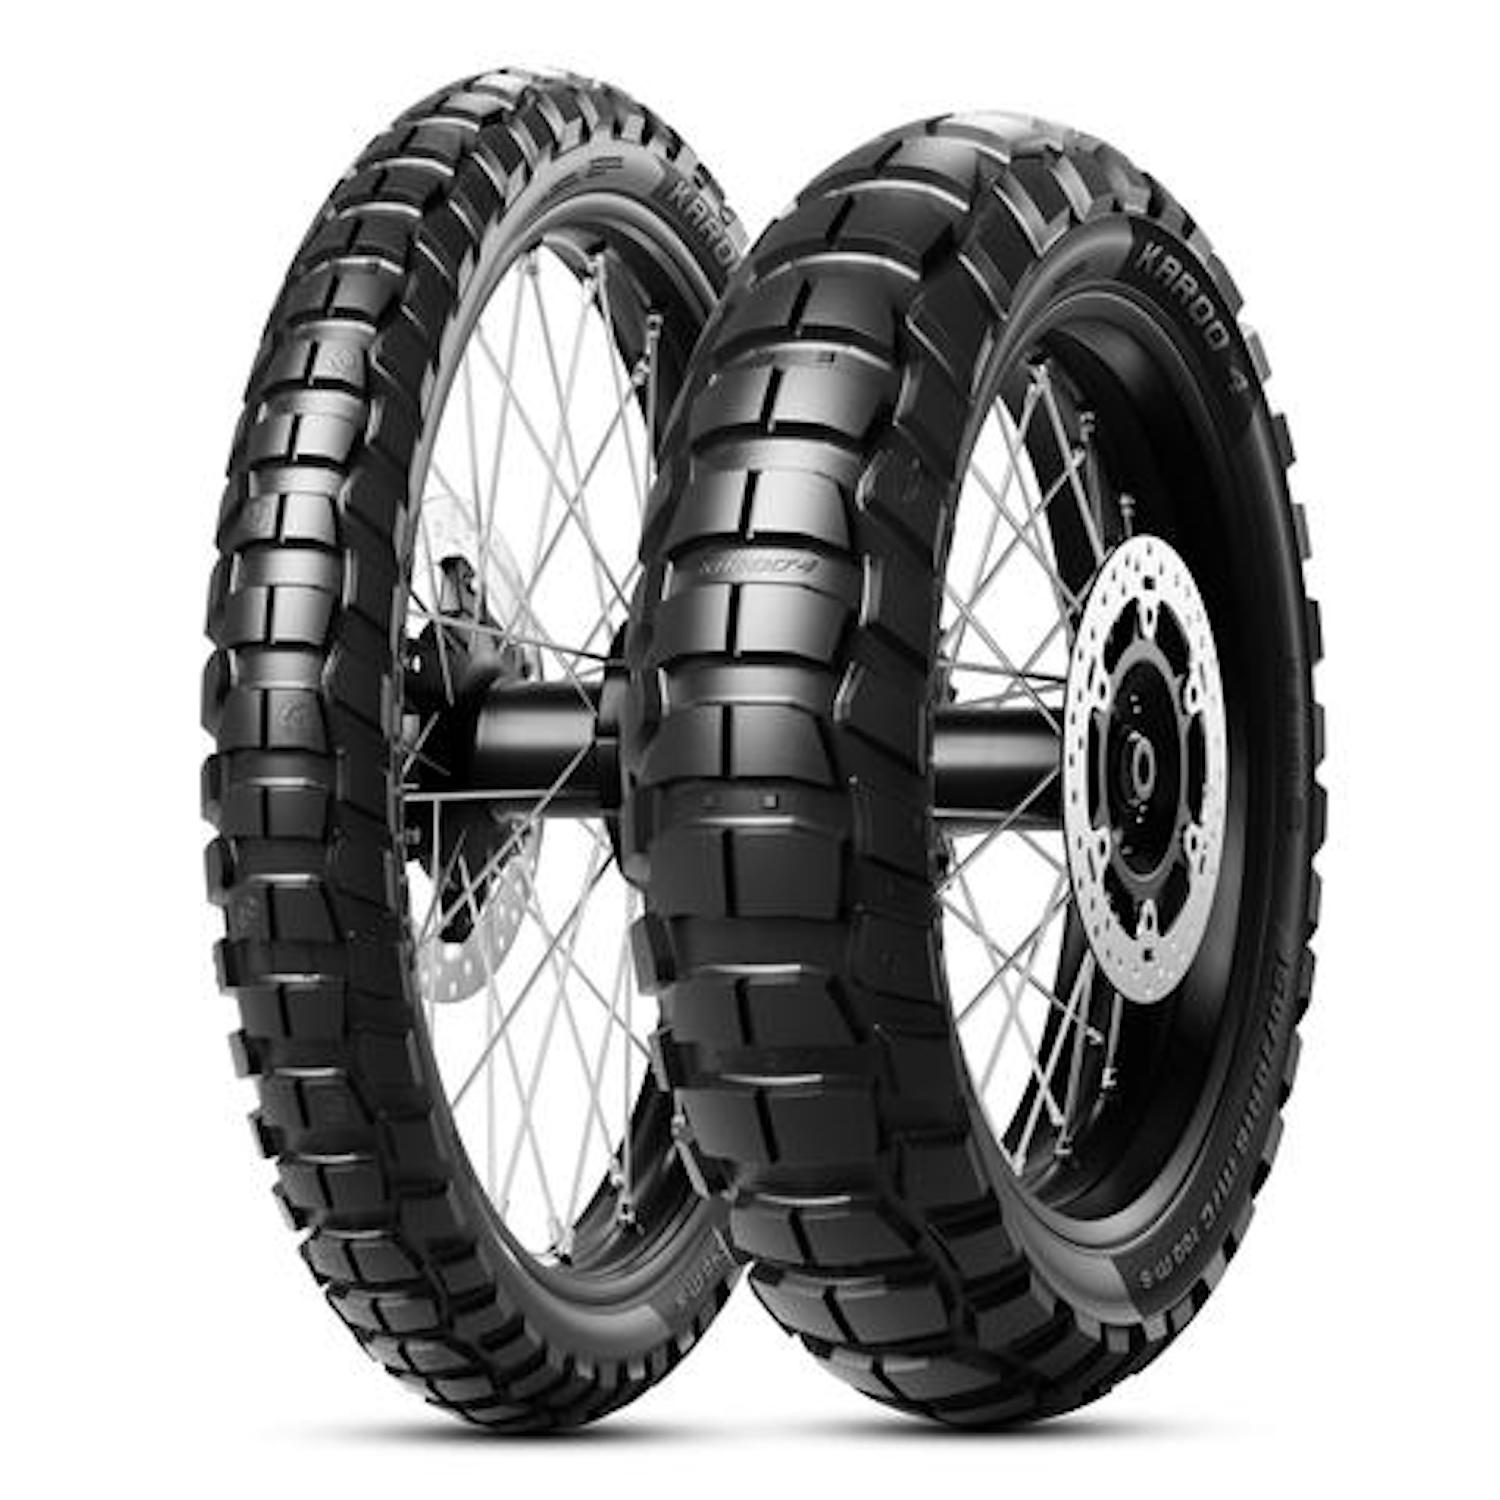 A view of the Metzeler Karoo 4 knobbly tyres, available as of this month